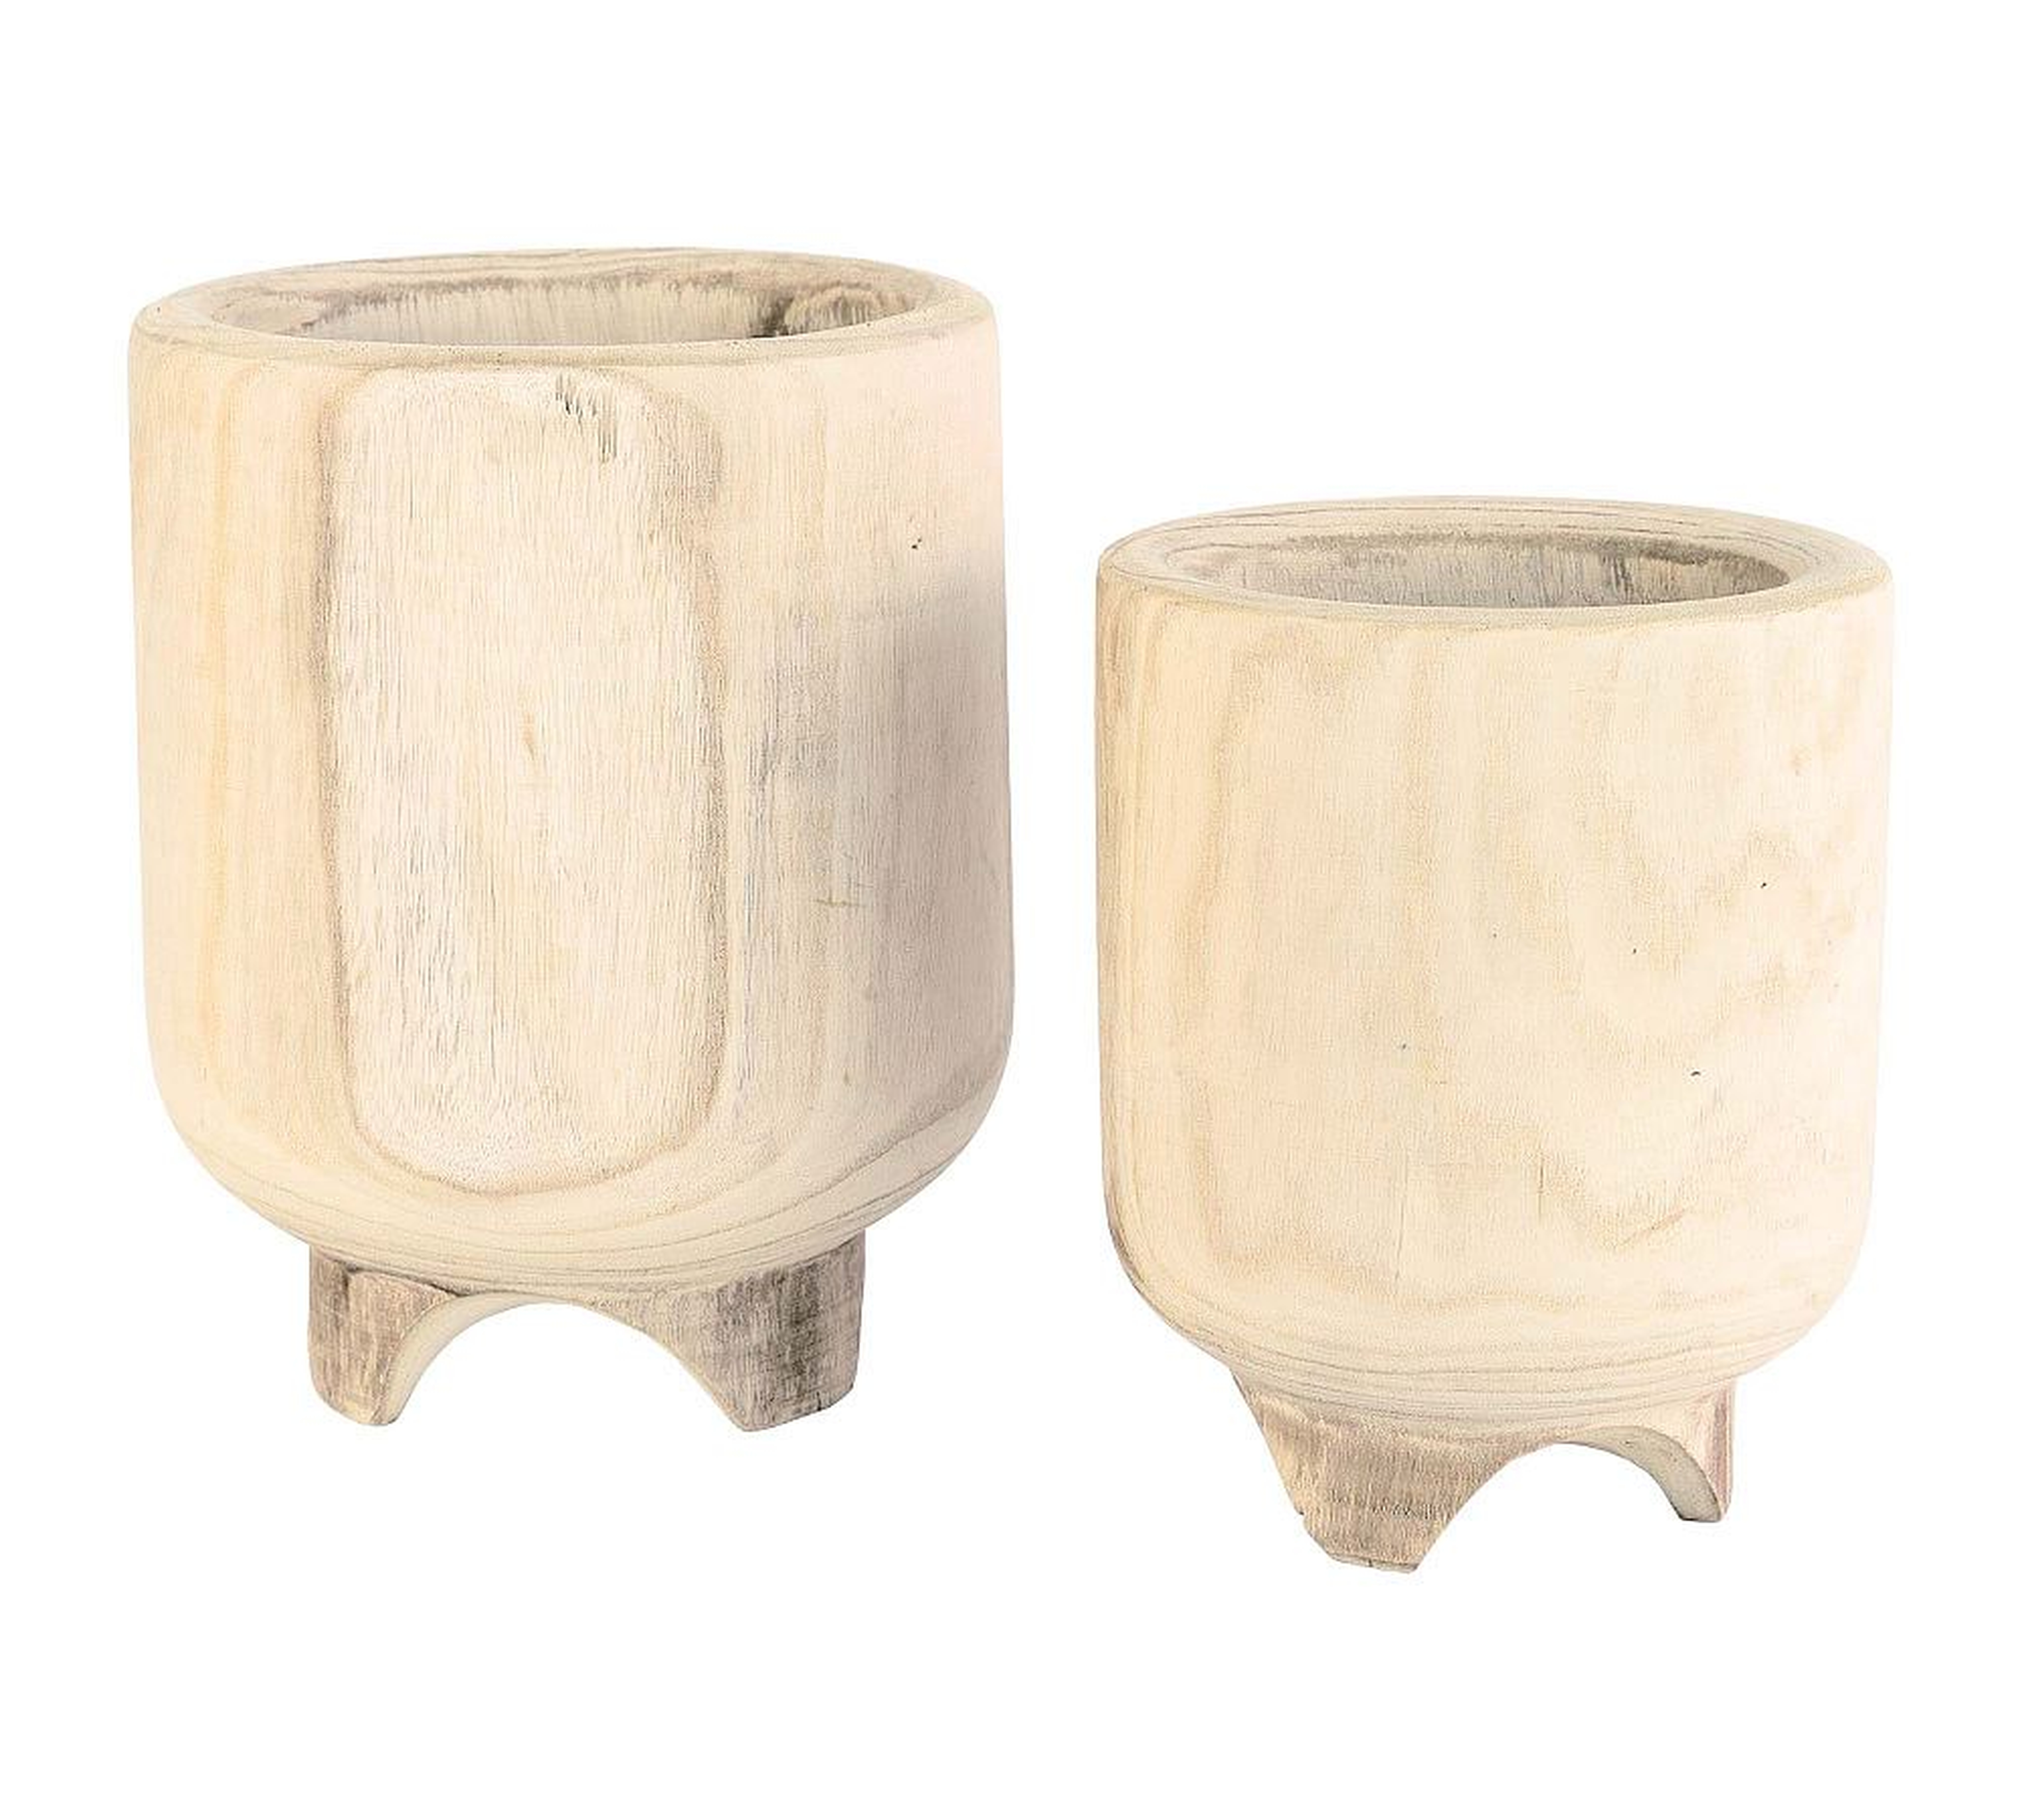 Paulownia Hand Carved Wooden Planters, Set of 2 - Pottery Barn